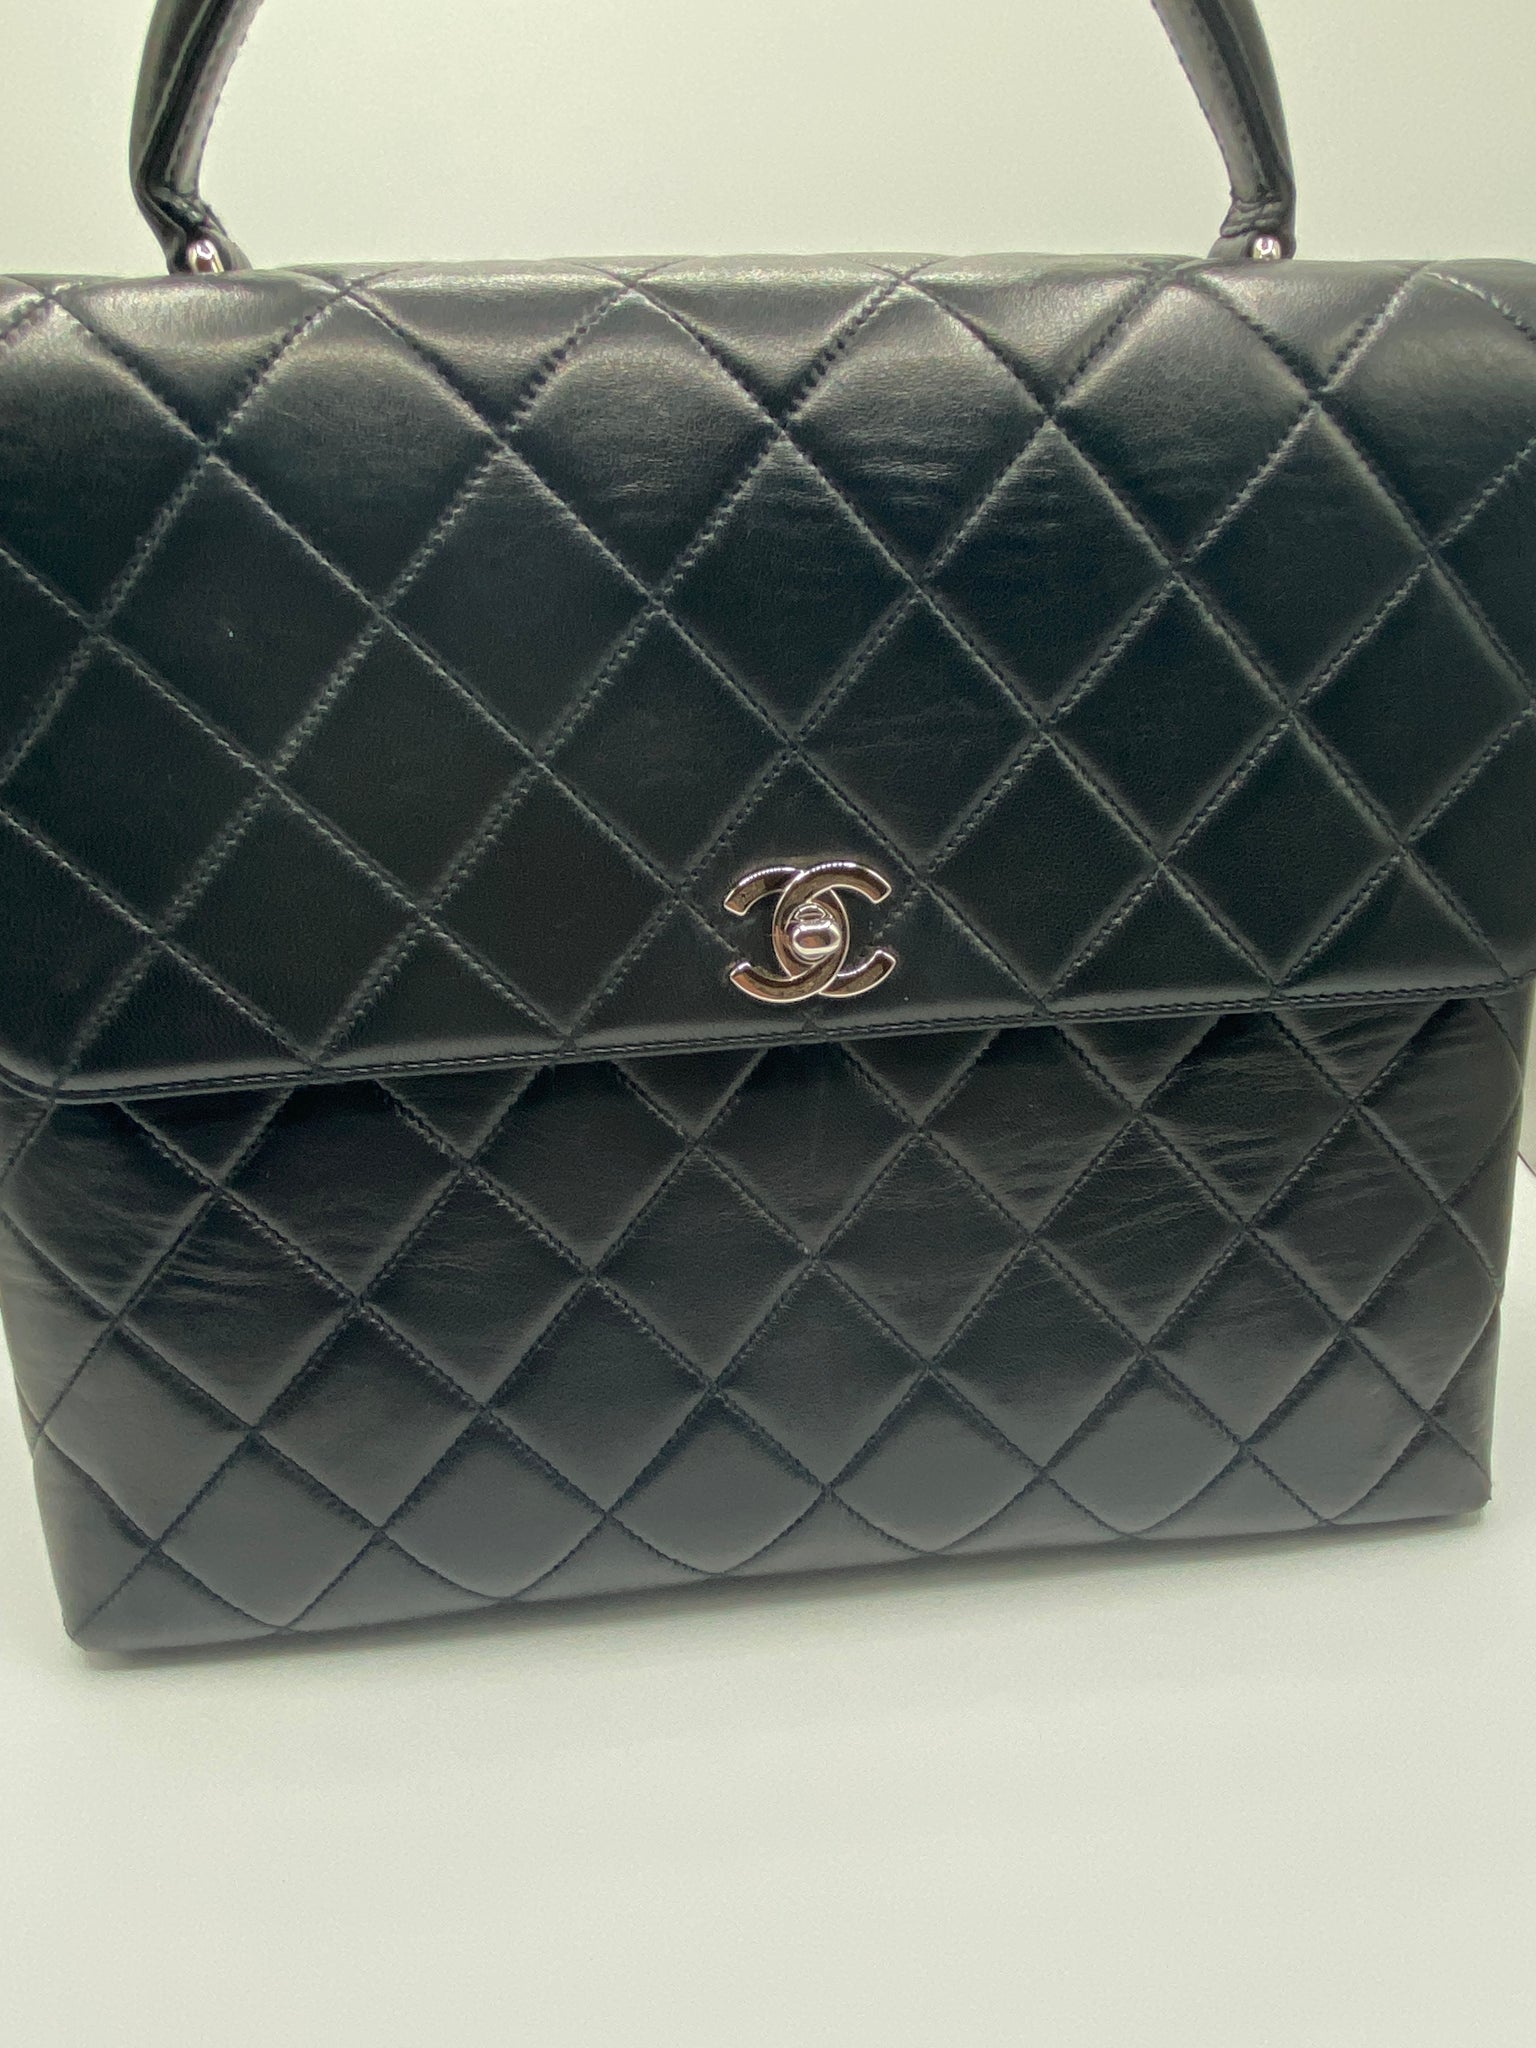 CHANEL CC TOP HANDLE FLAP BLACK PATENT LEATHER KELLY BAG